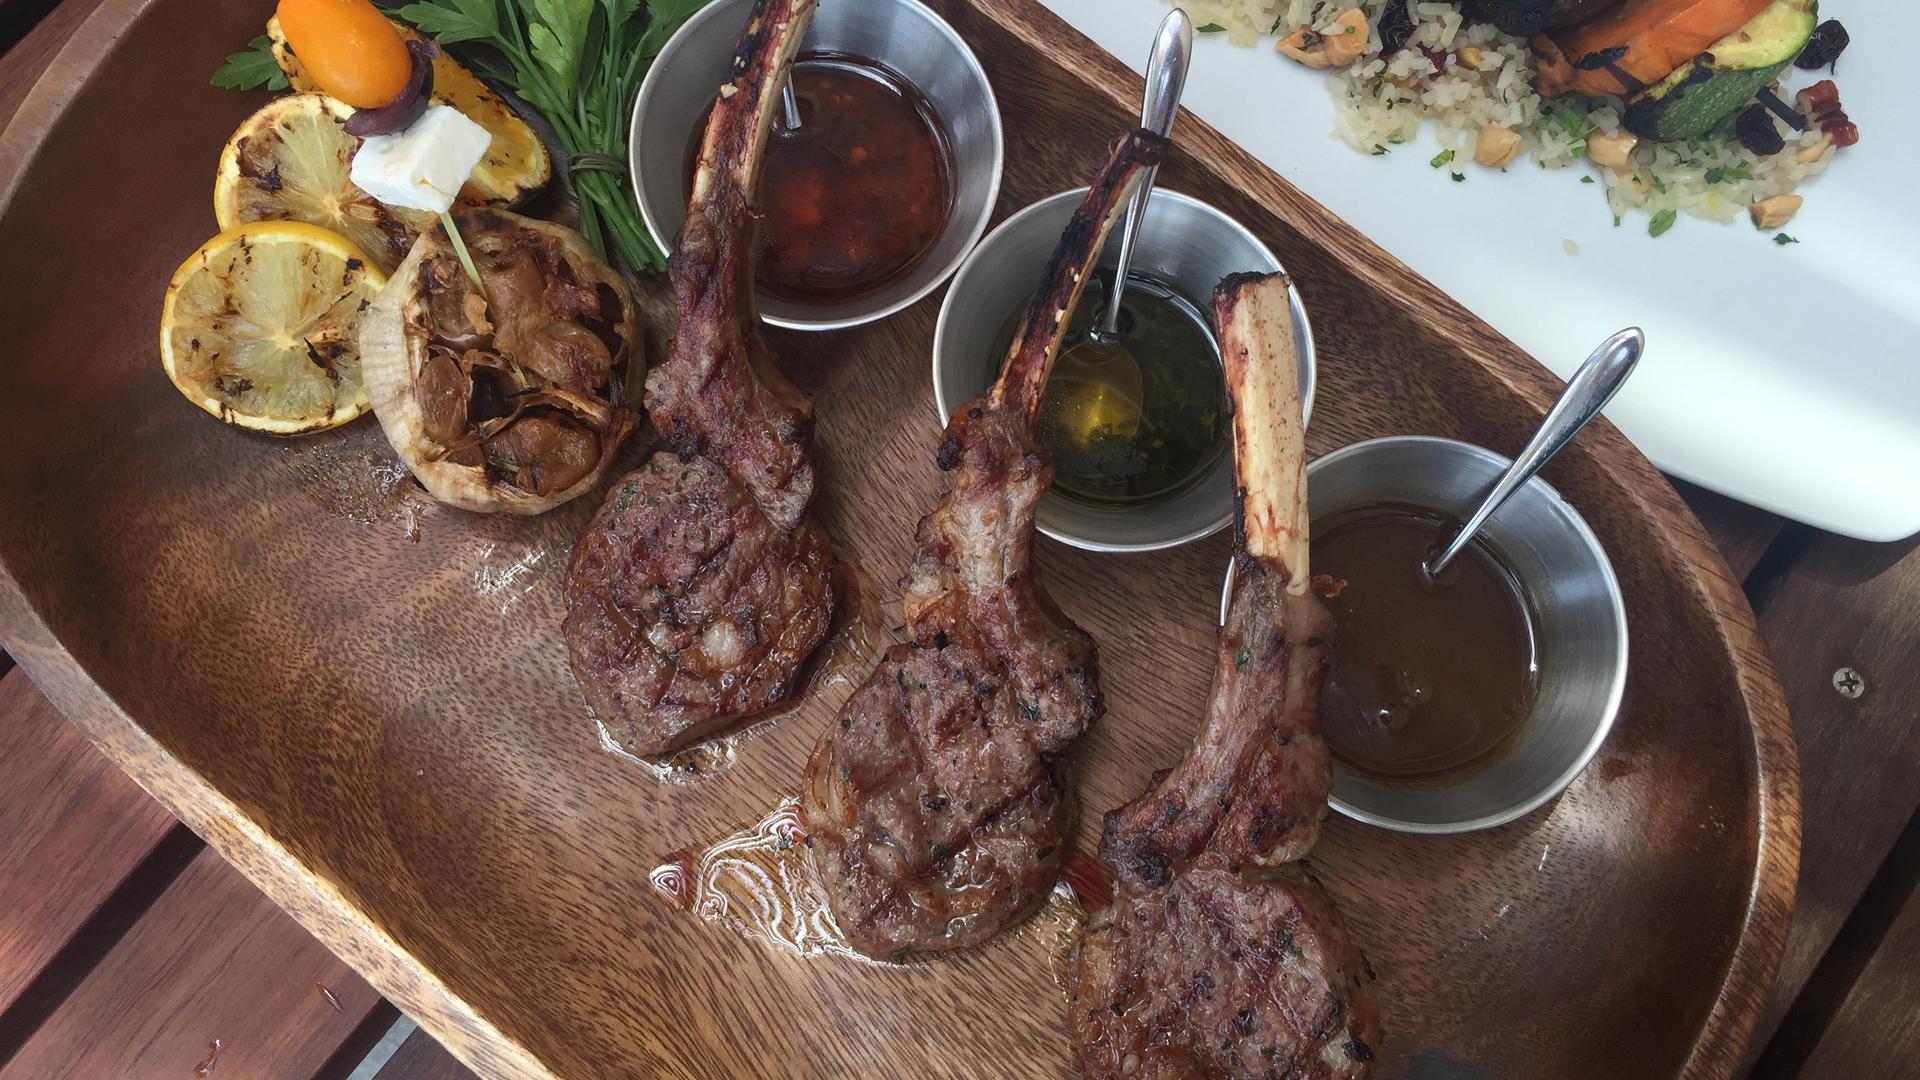 Grilled lamb chops from C-Grill in Playa del Carmen.